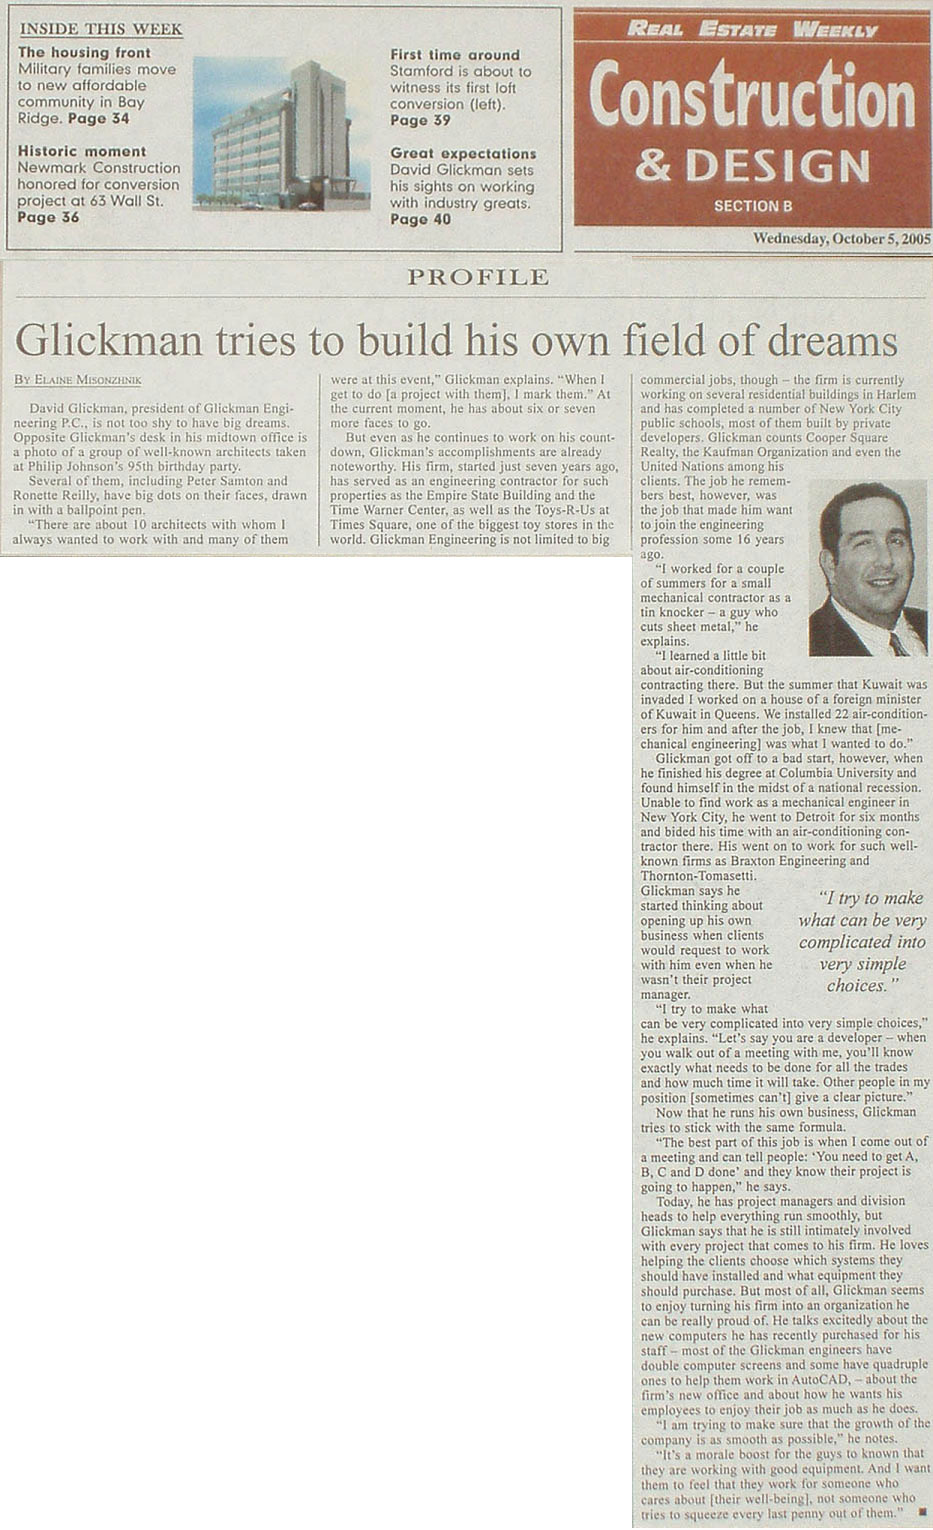 Glickman Tries to Build His Own Field of Dreams